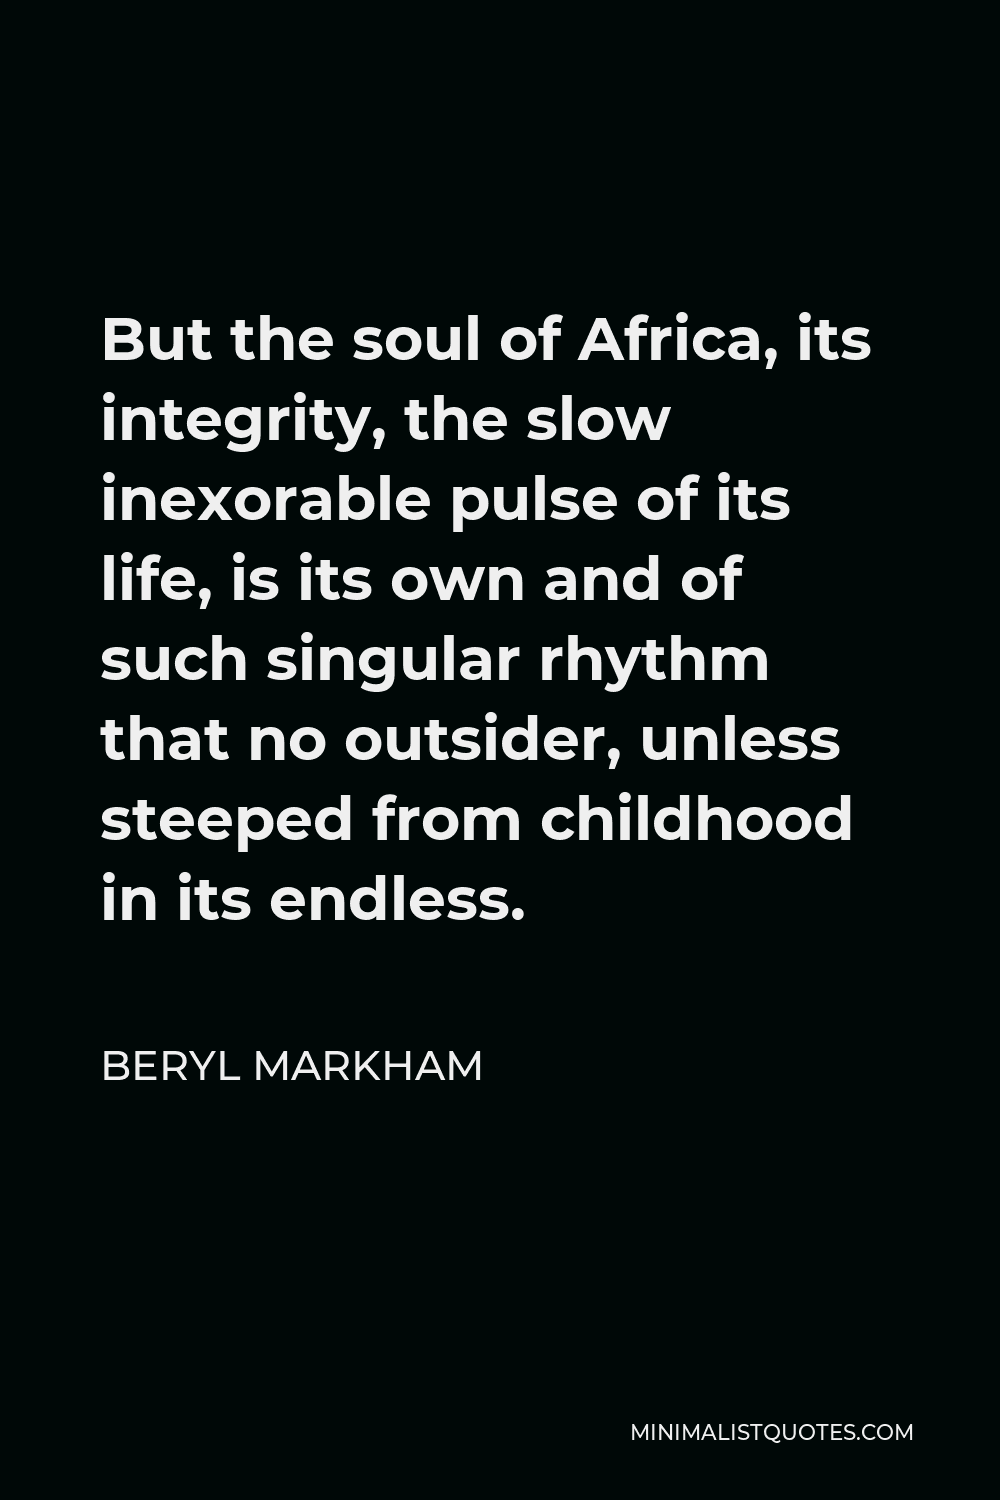 Beryl Markham Quote - But the soul of Africa, its integrity, the slow inexorable pulse of its life, is its own and of such singular rhythm that no outsider, unless steeped from childhood in its endless.